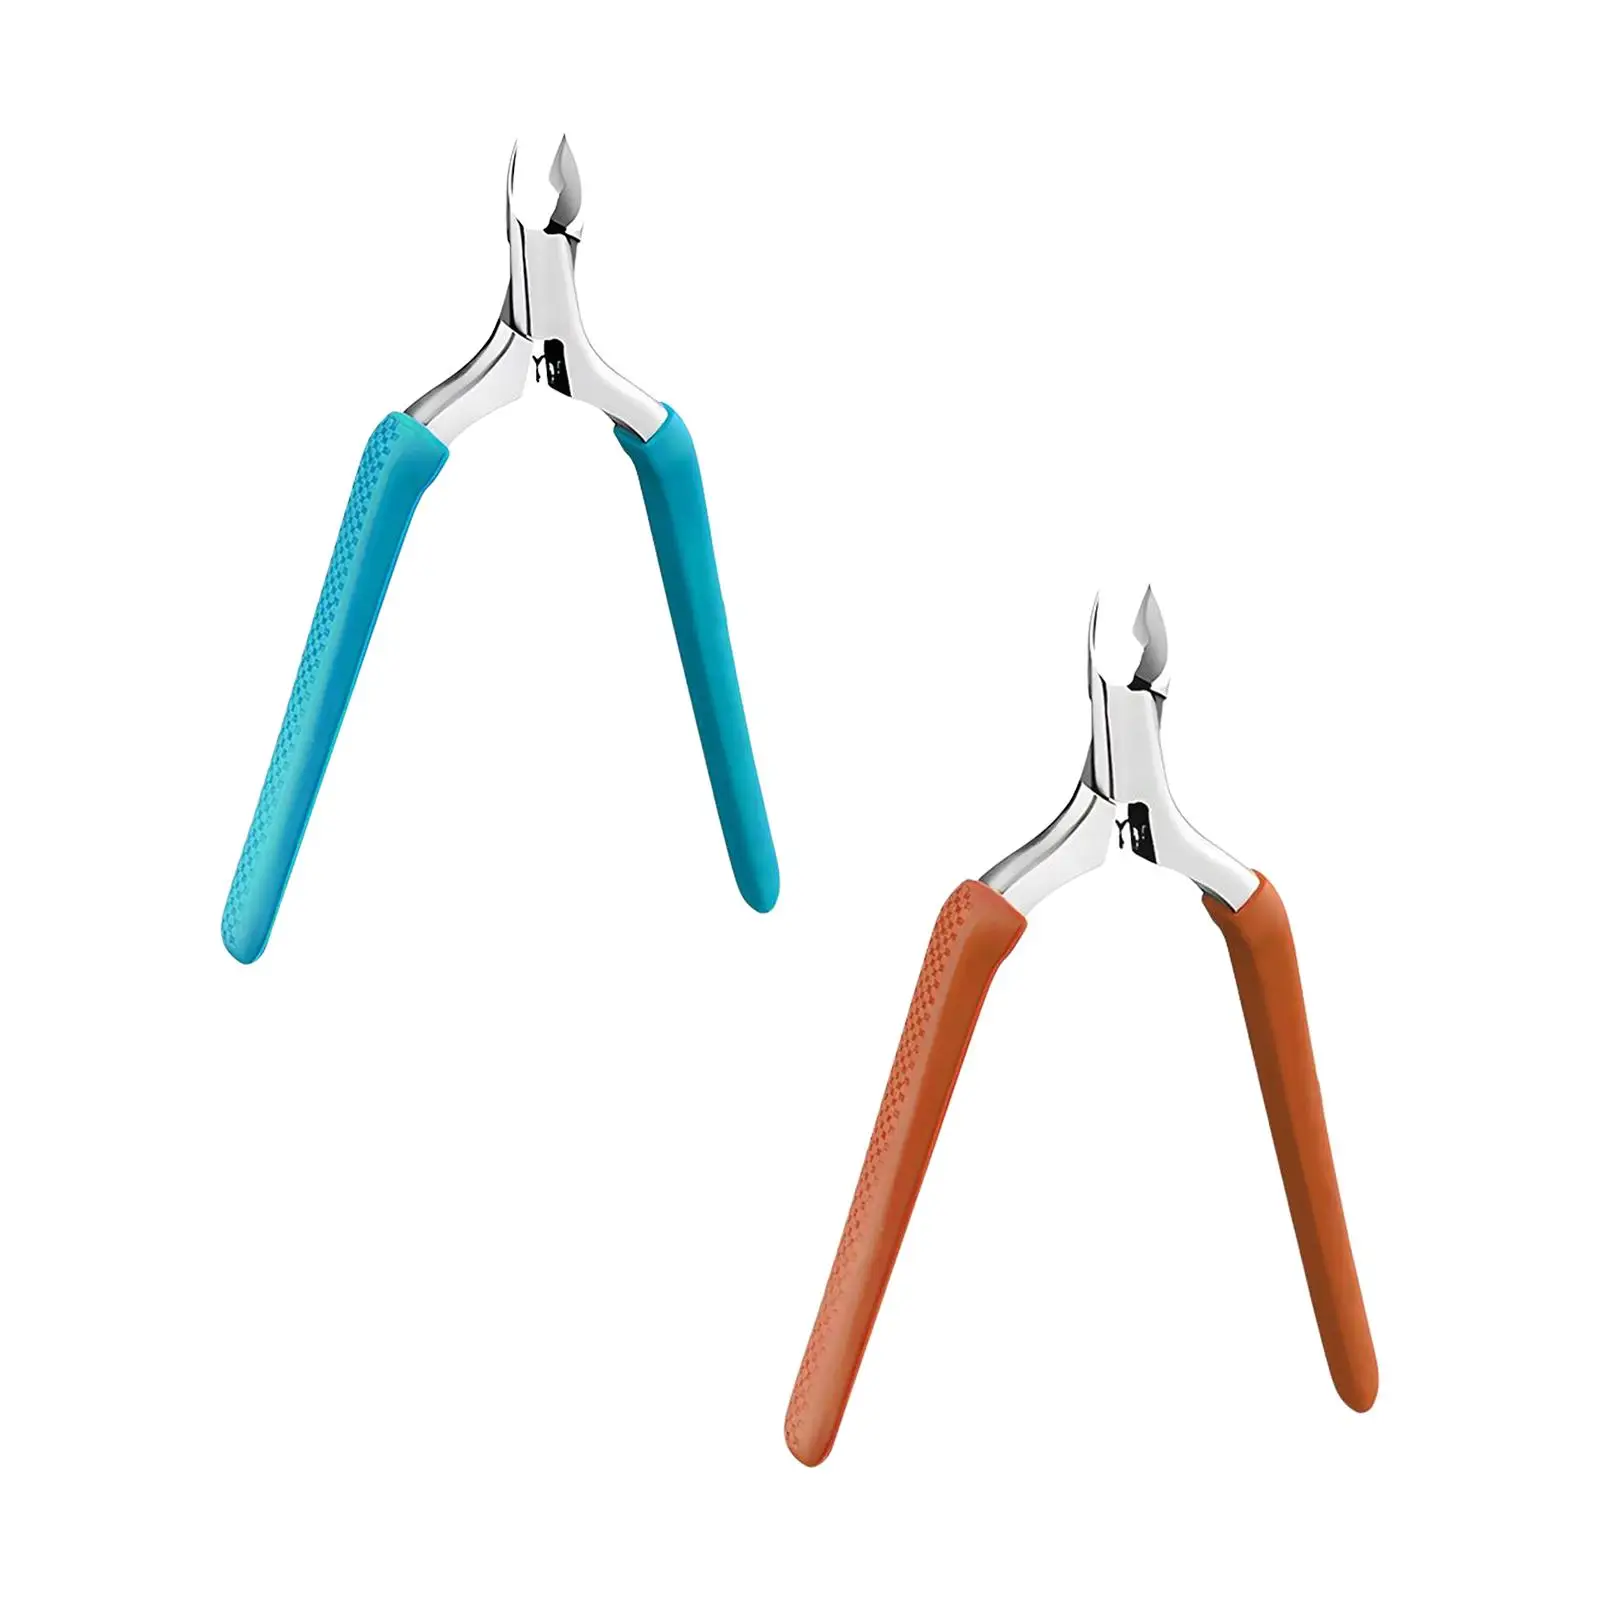 Cuticle Nipper Sturdy with Cuticle Pusher Cutters Anti Slip Professional Nail Cuticle Trimmer for Fingernails and Toenails